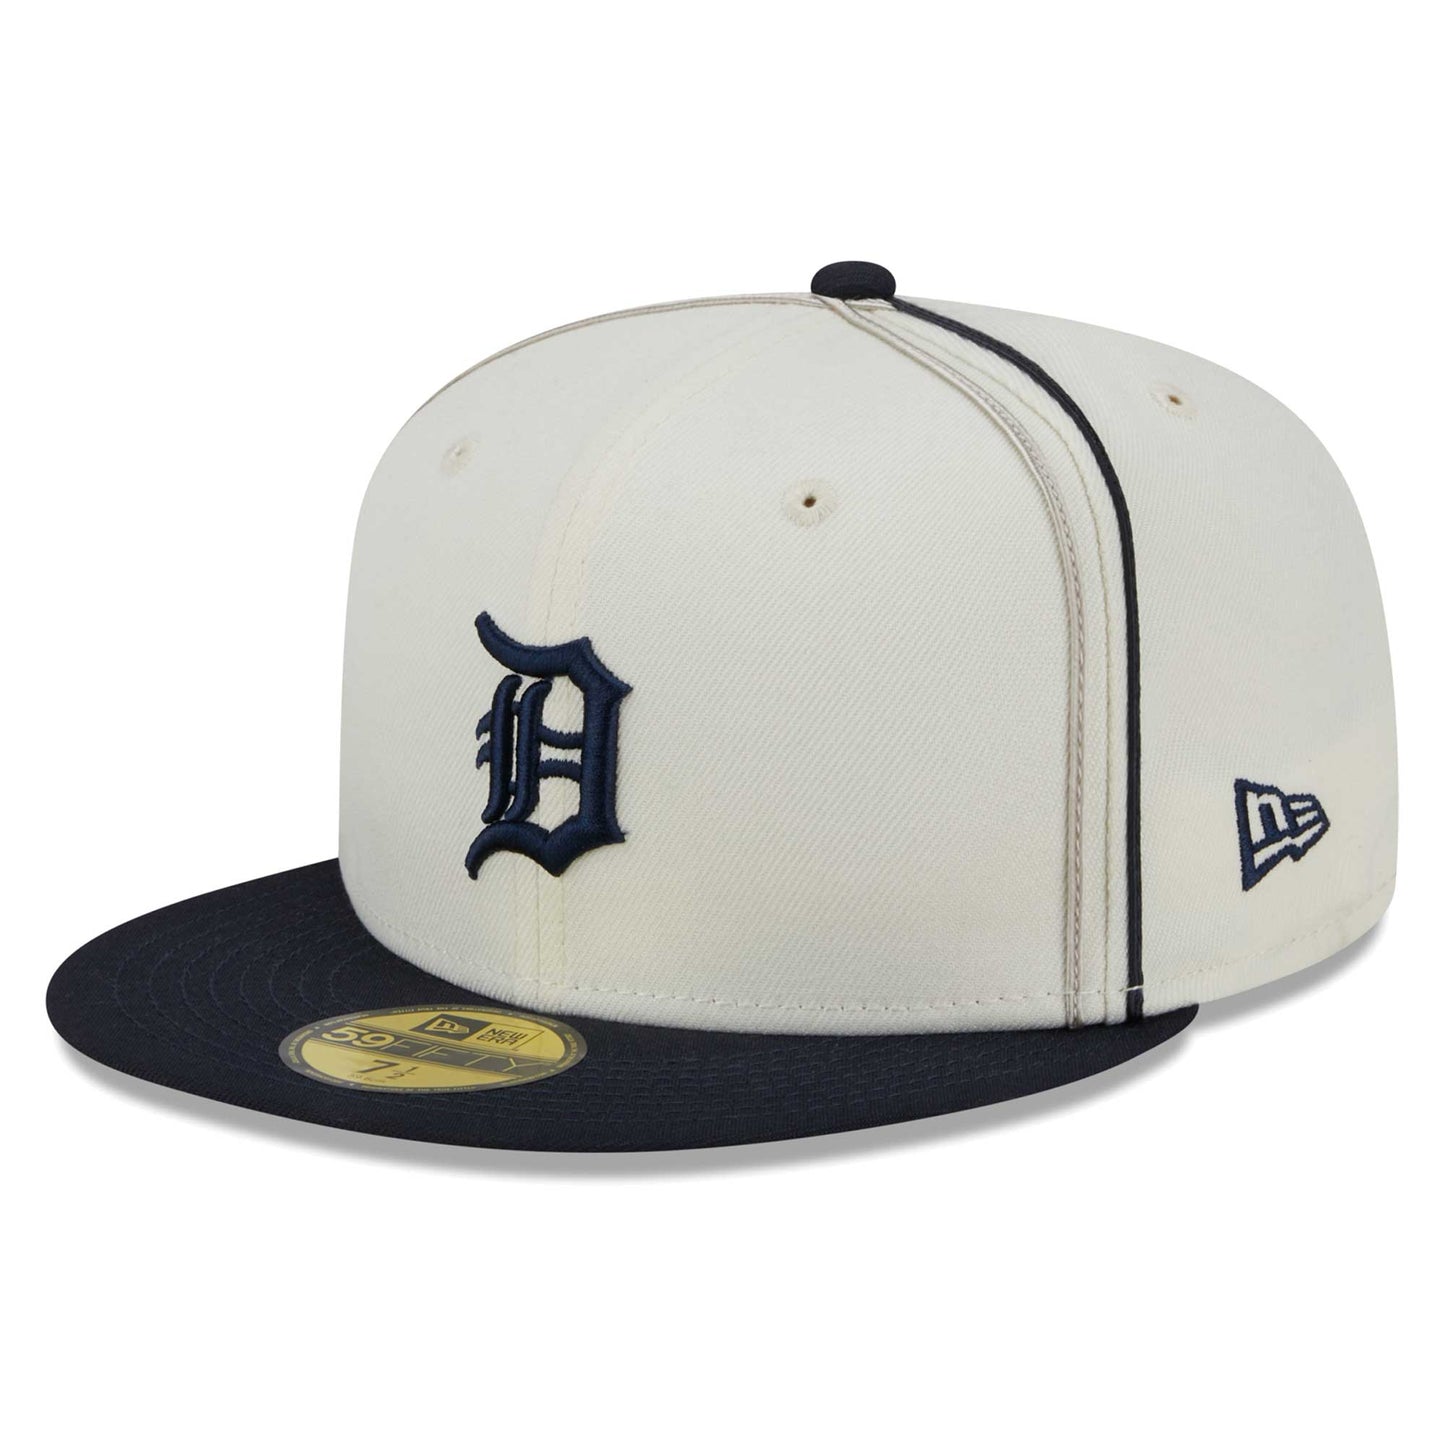 Detroit Tigers New Era Chrome Sutash 59FIFTY Fitted Hat - Cream/Navy